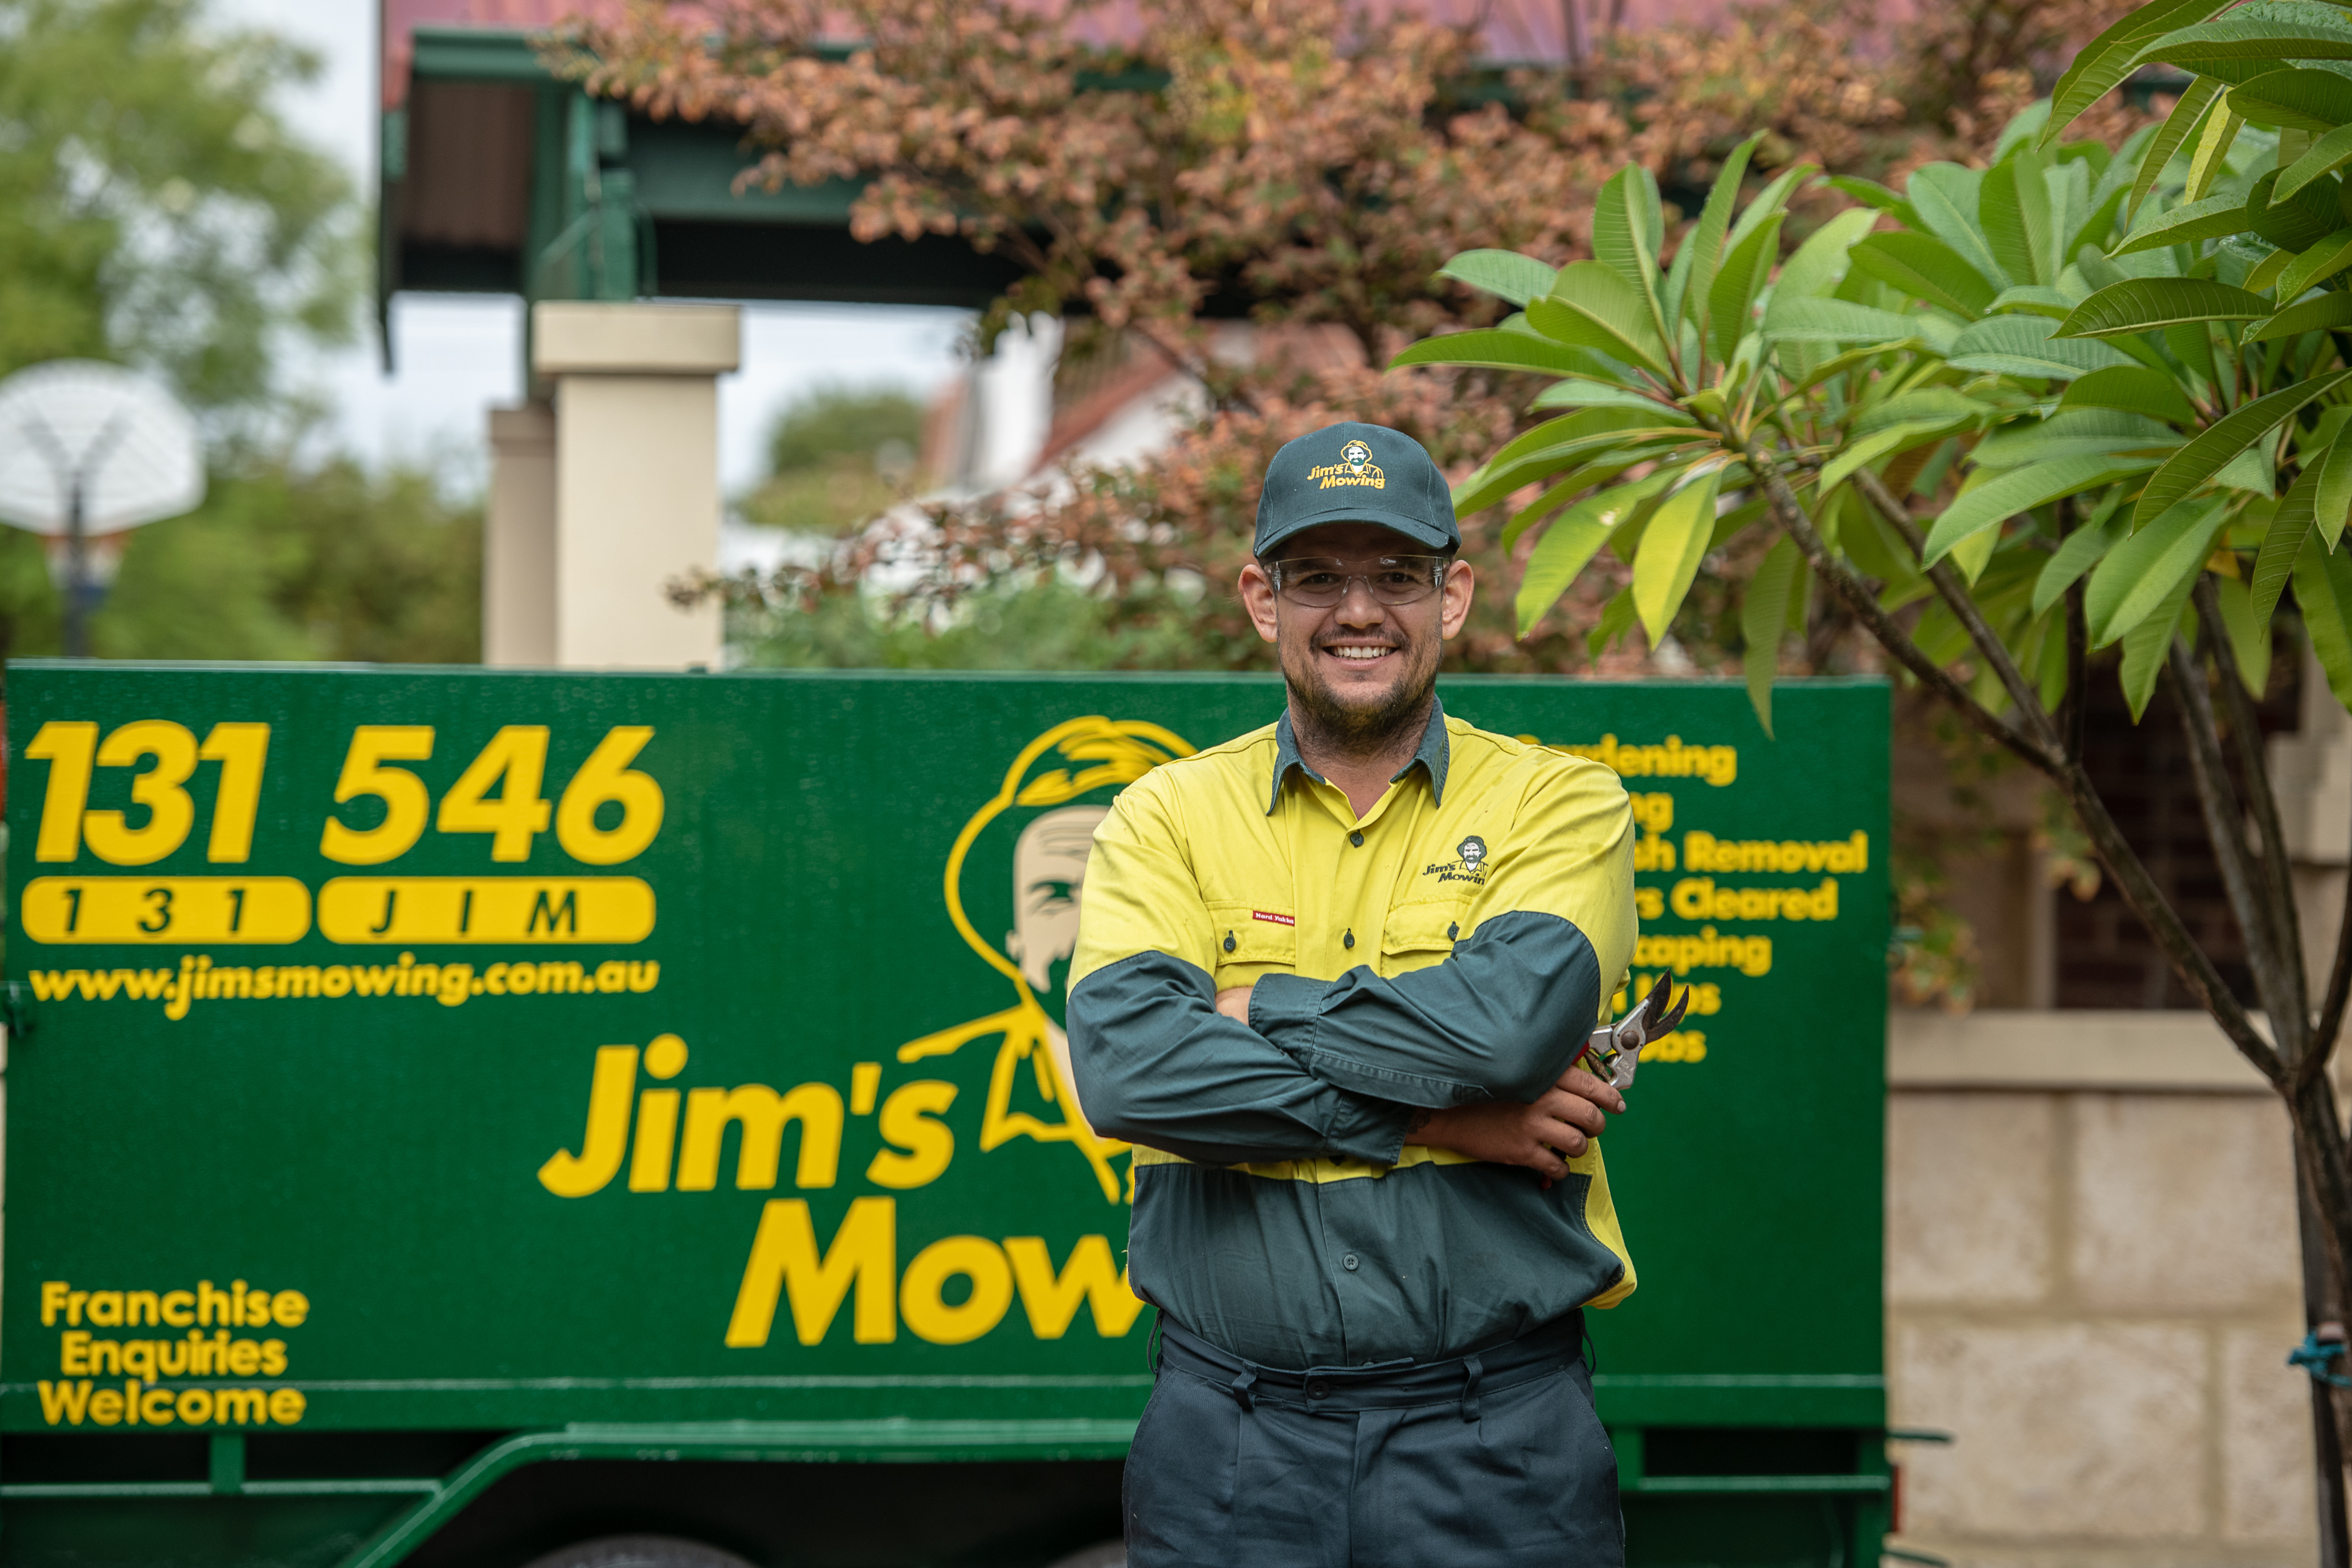 Jim's Mowing team member Standing in front of Jim's Mowing Container